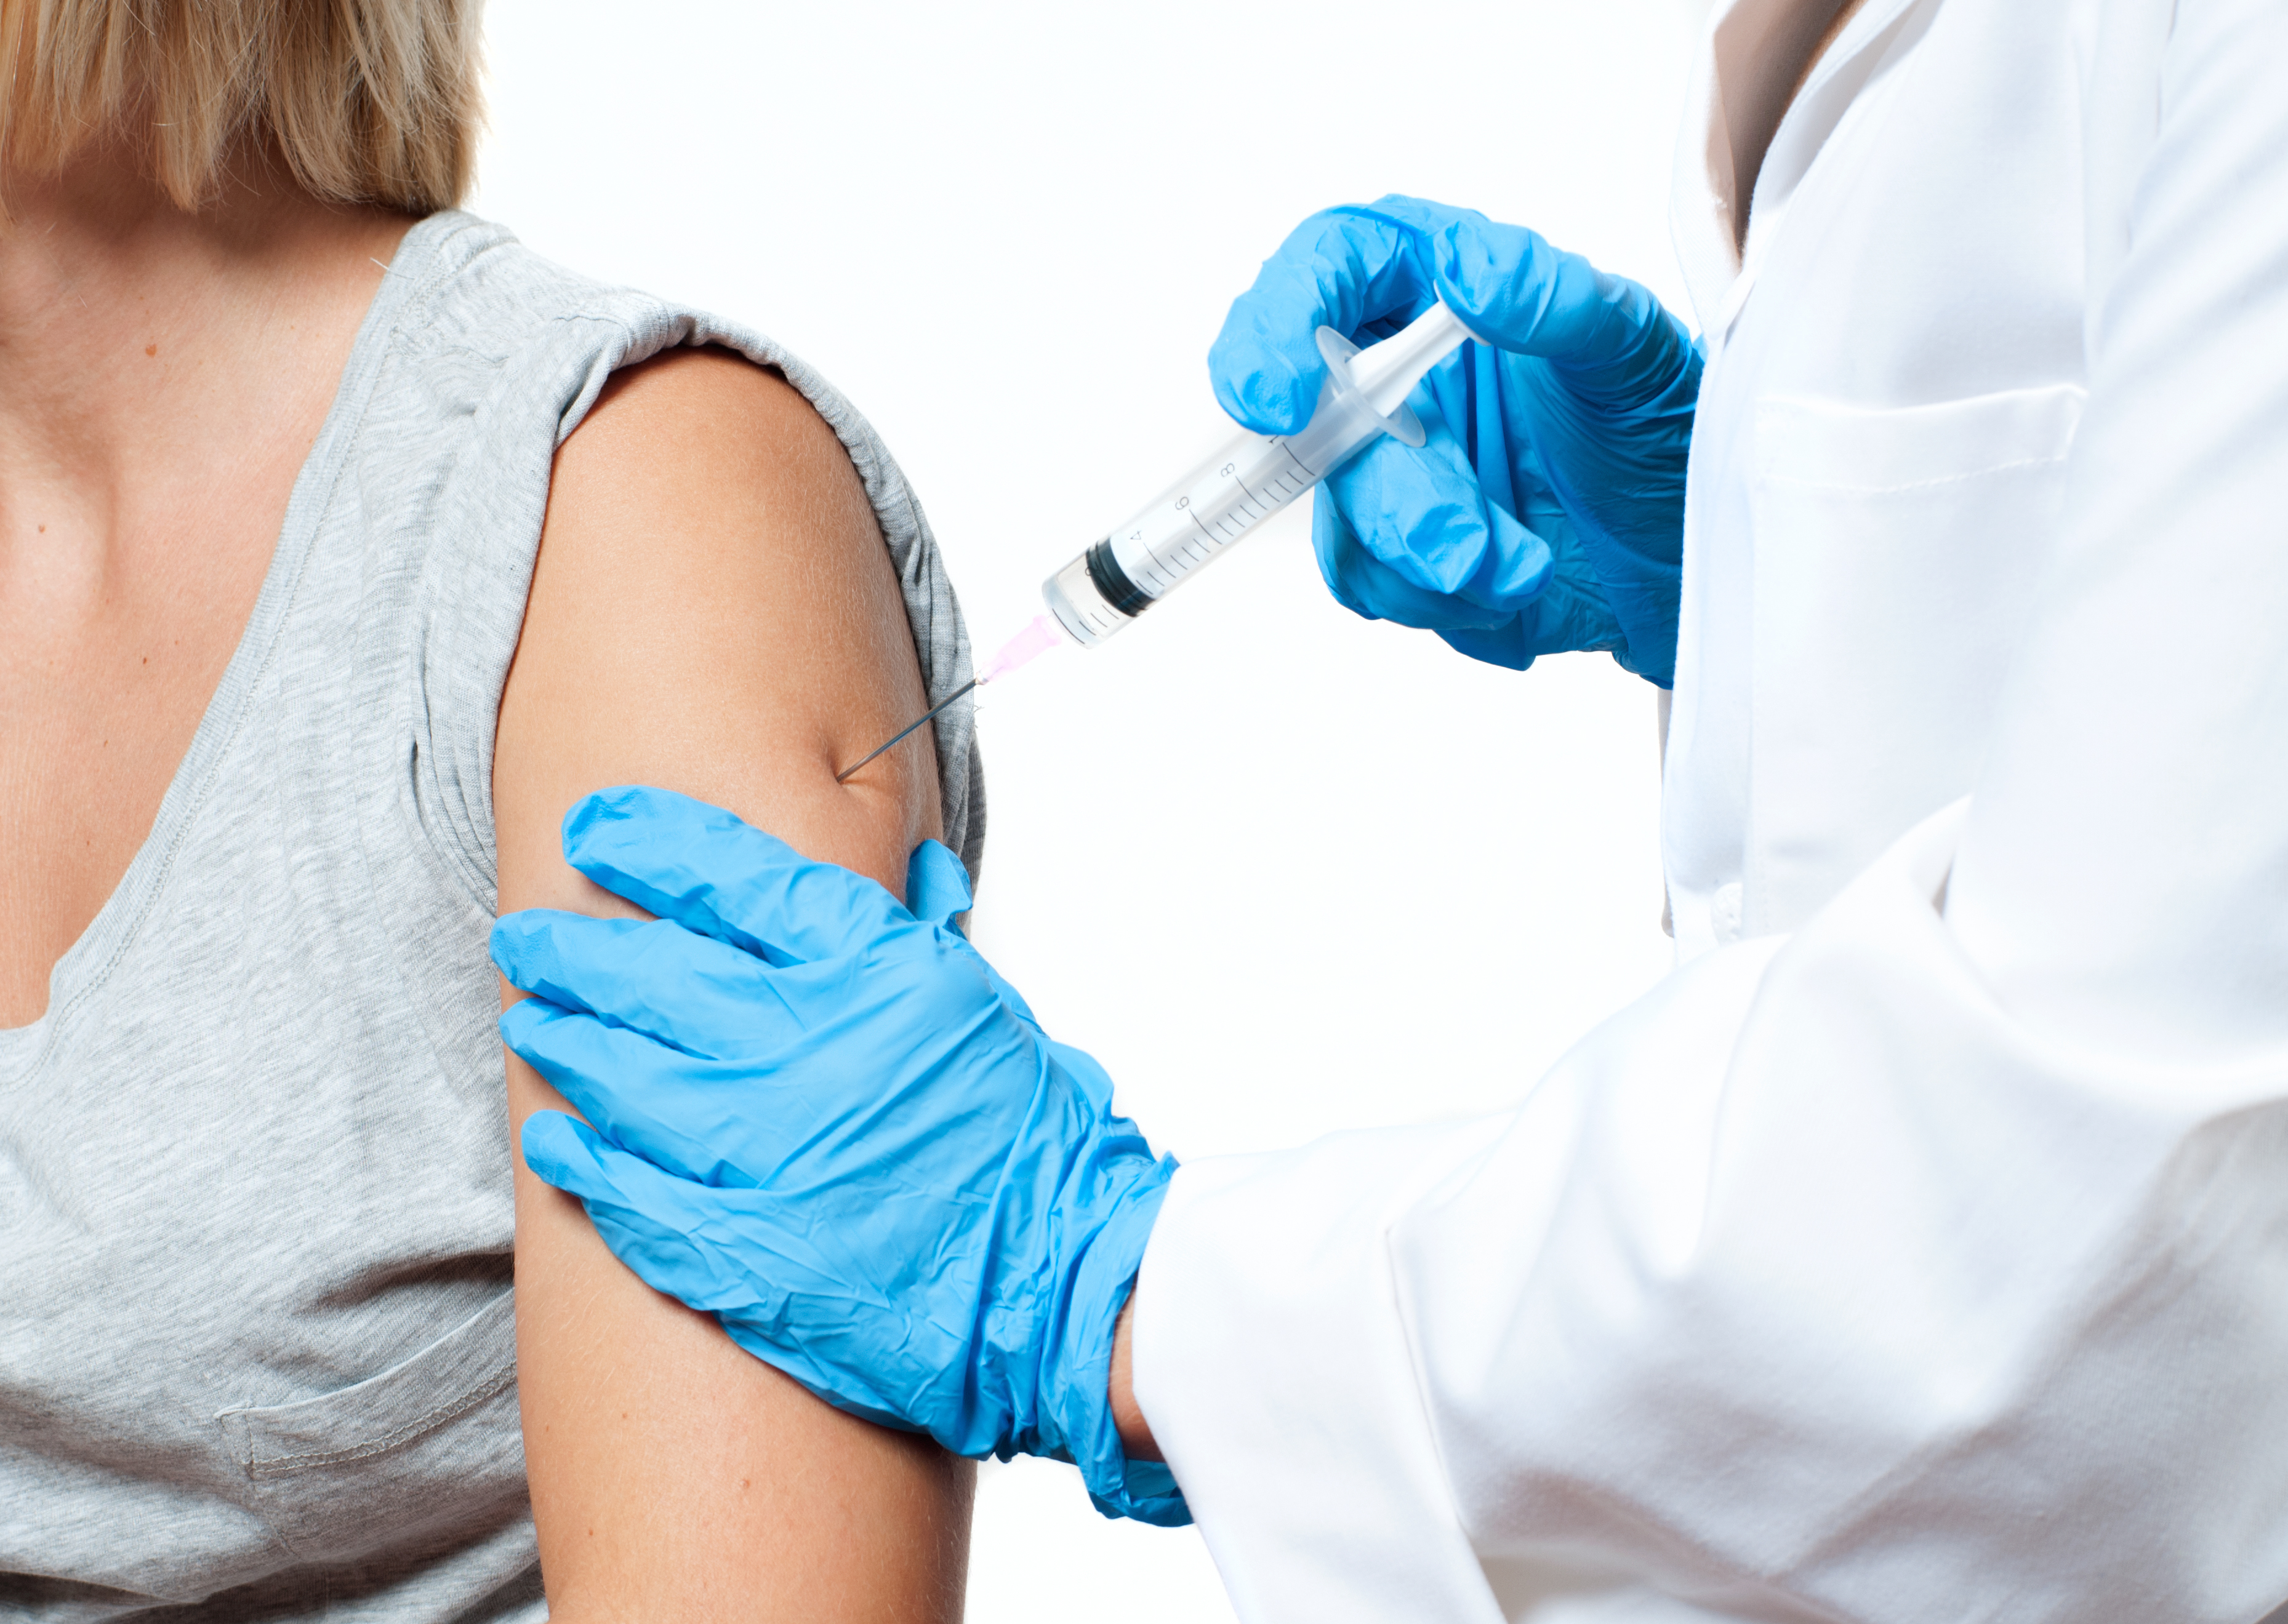 Clinical Corner: Challenges of adult immunizations